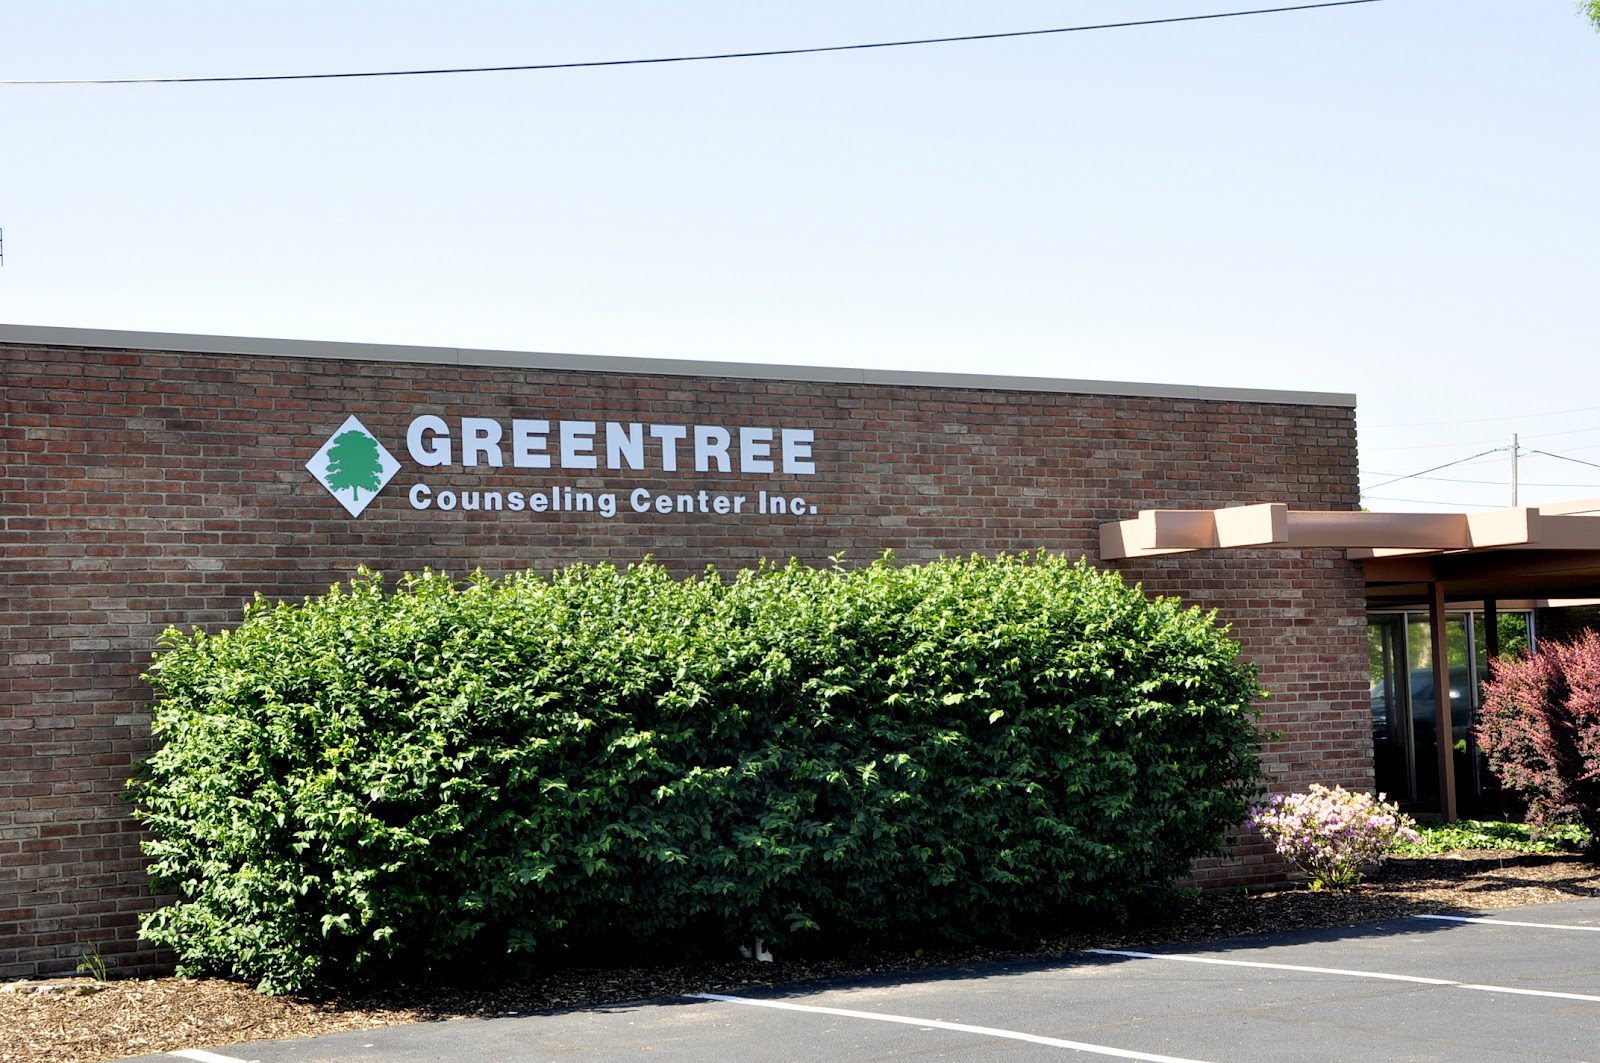 Greentree Counseling Center